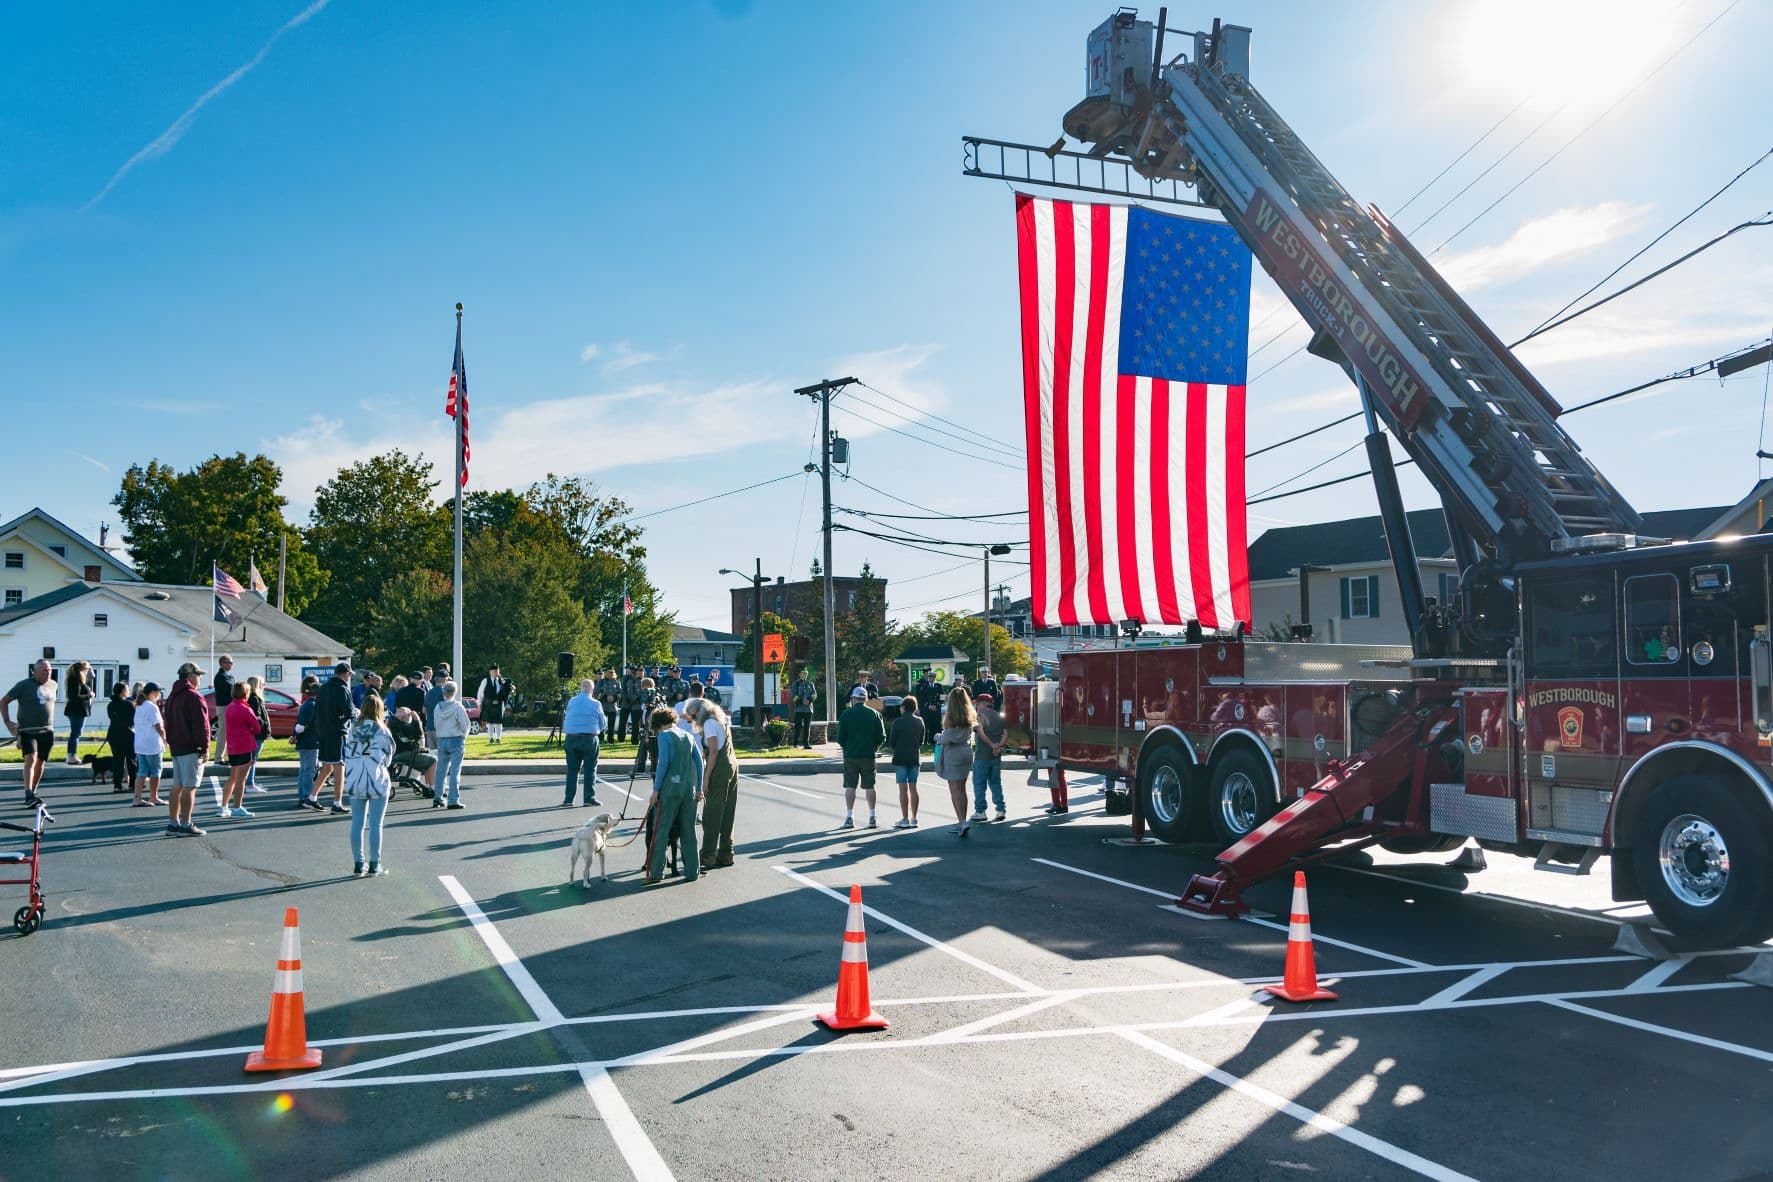 Church bells punctuate 9/11 Anniversary ceremony in Westborough